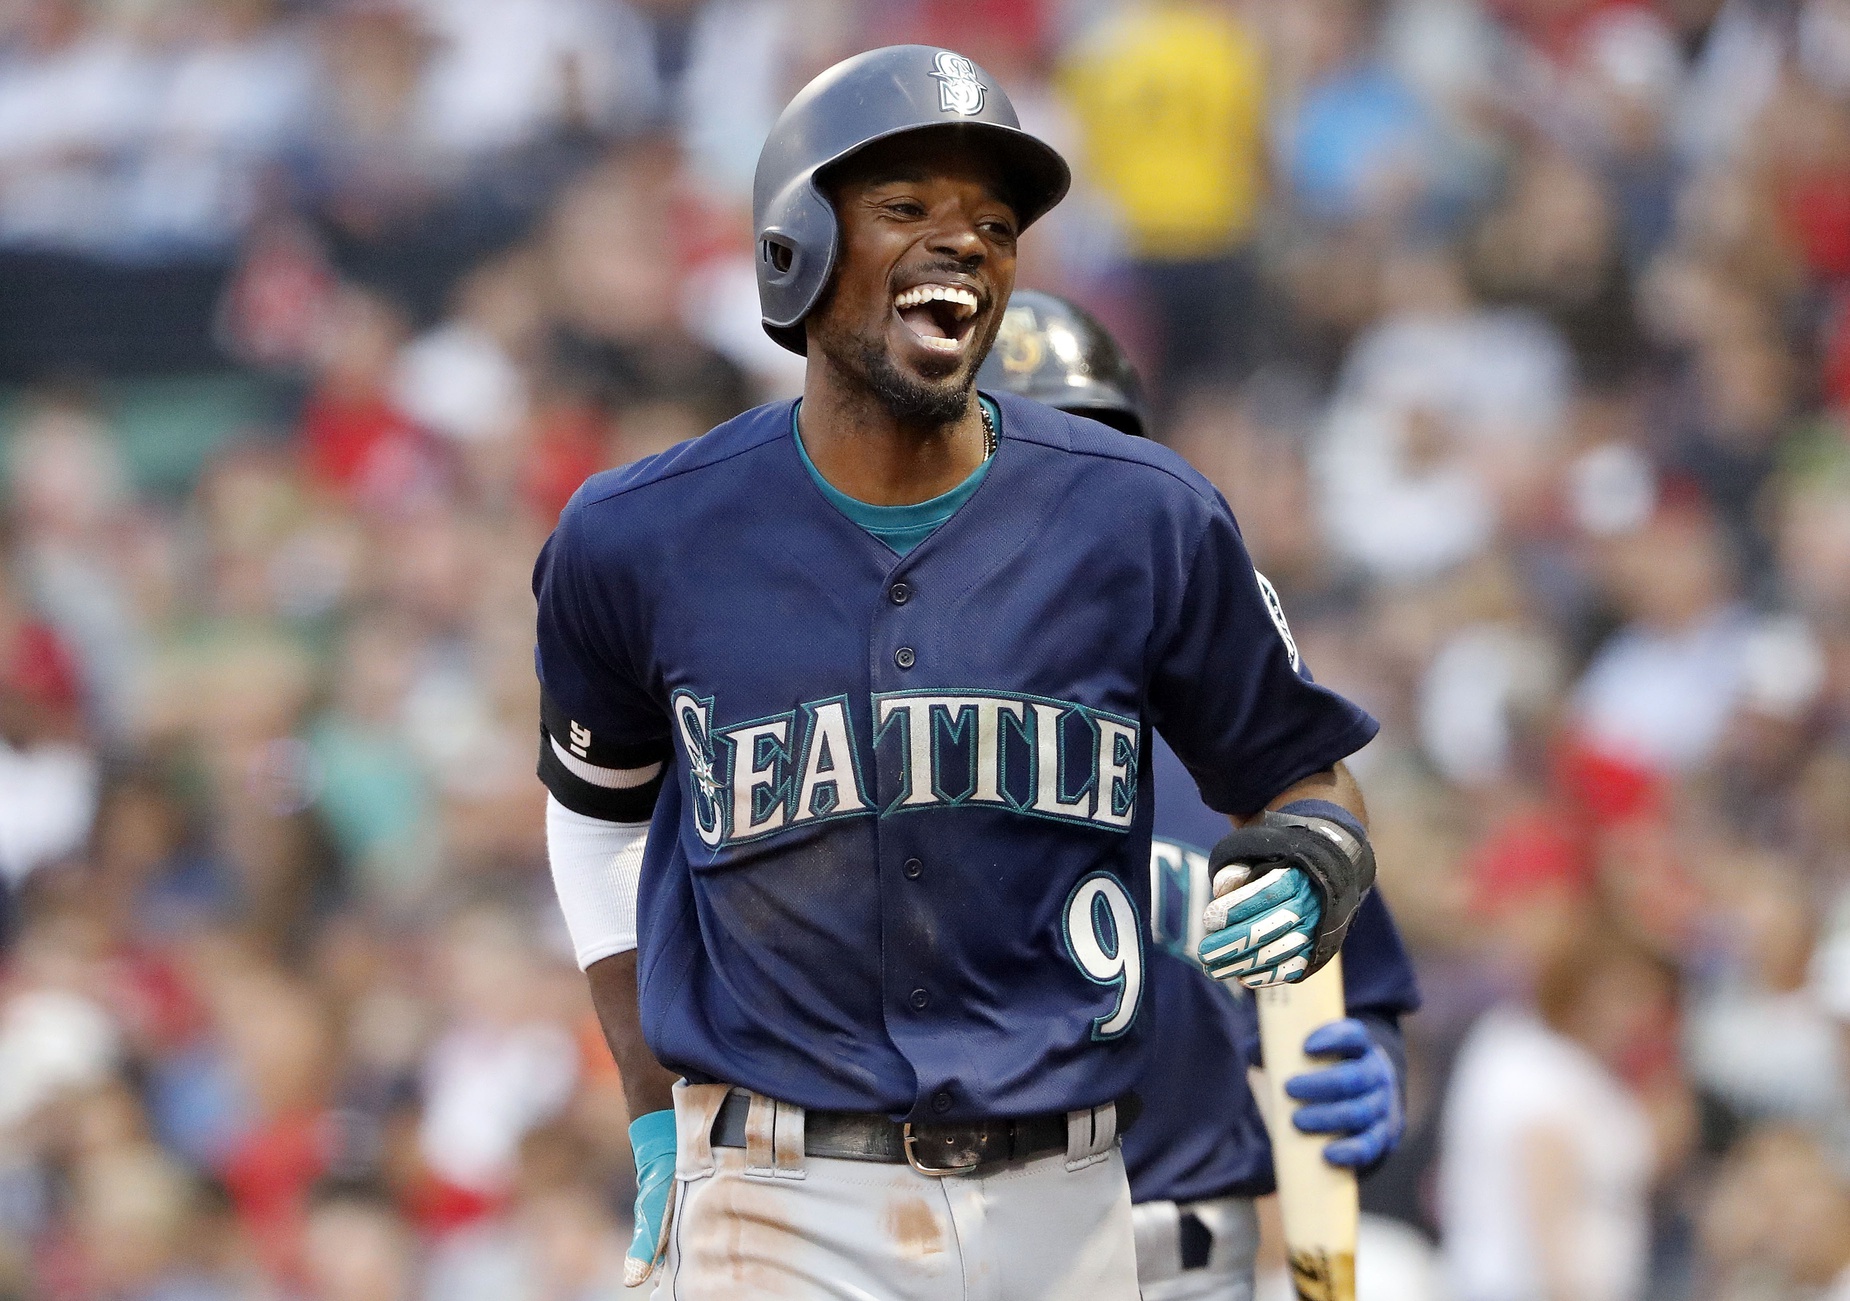 Jun 22, 2018; Boston, MA, USA; Seattle Mariners second baseman Dee Gordon (9) smiles after scoring a run against the Boston Red Sox during the second inning at Fenway Park. Mandatory Credit: Winslow Townson-USA TODAY Sports